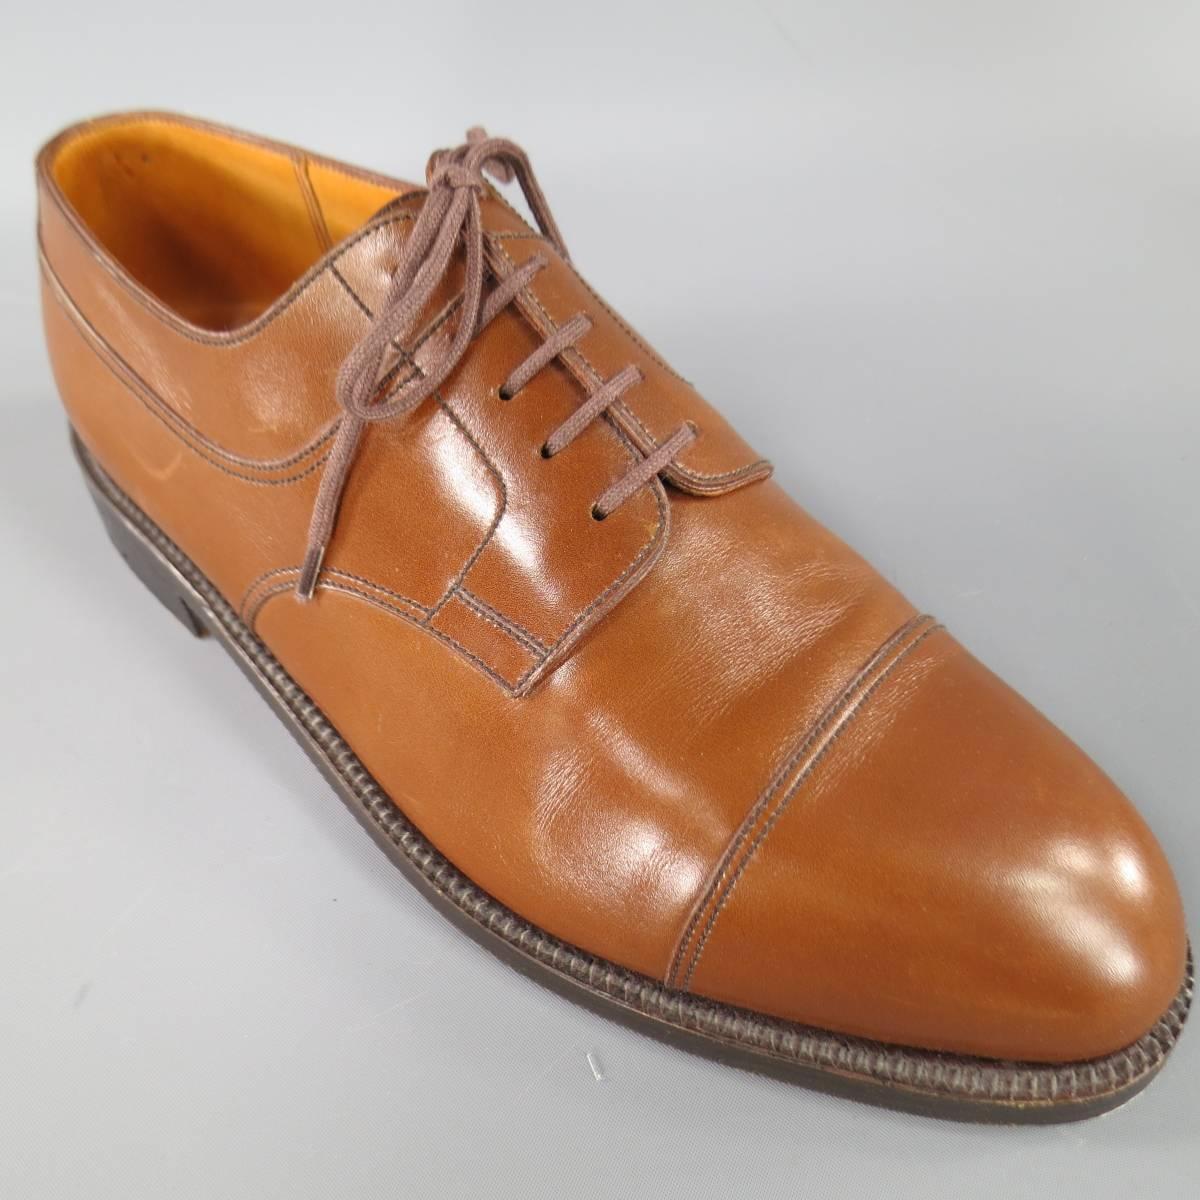 These classic vintage J.M. WESTON dress shoes come in rich tan smooth leather with a cap toe and lace up front. Made in France.
 
Excellent Pre-Owned Condition.
Marked: 8
 
11.5 x 4.25 in.